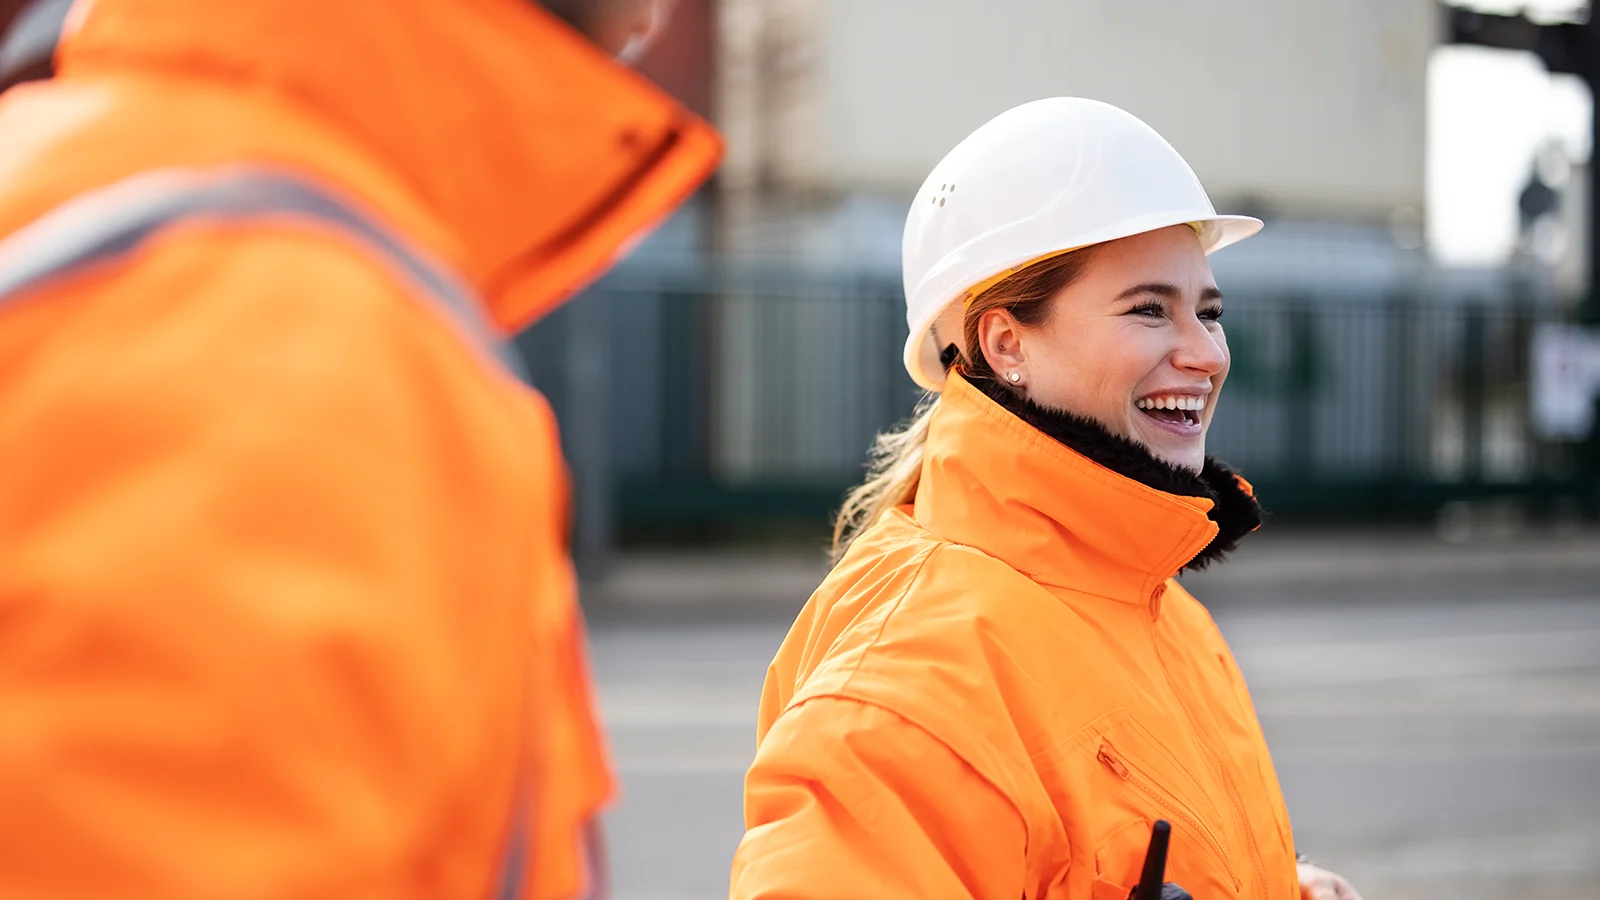 Woman in bright orange jacket wearing a construction hat smiling